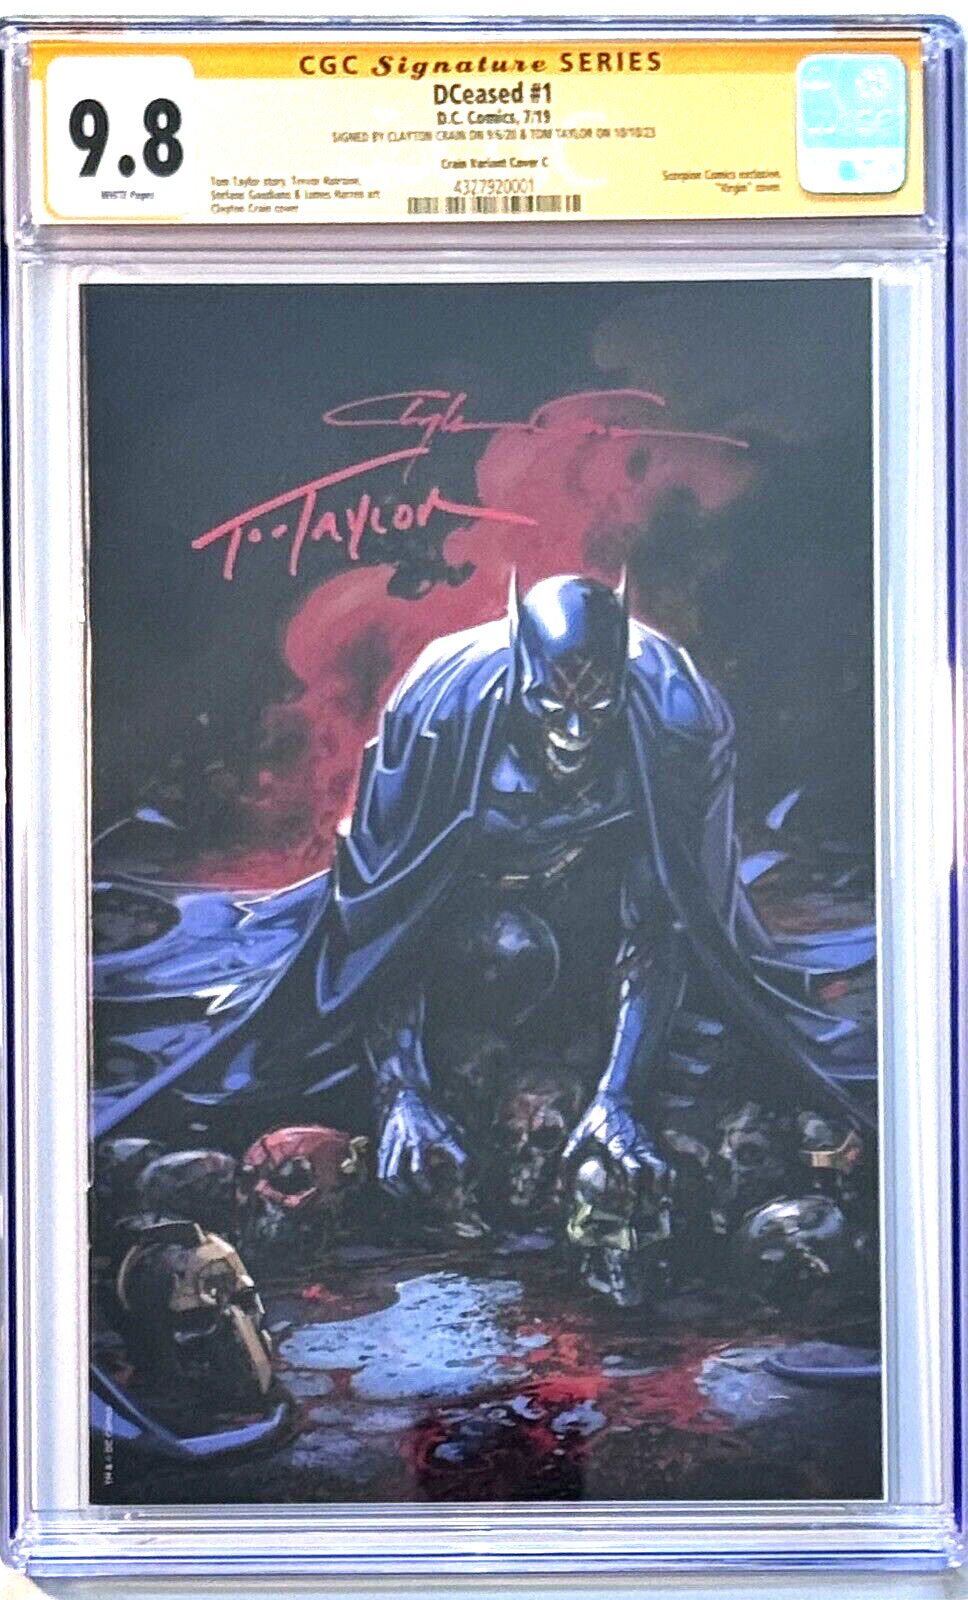 DCEASED #1 CGC SS 9.8 Clayton Crain Variant Limited 600 DUAL sigs Crain & Taylor